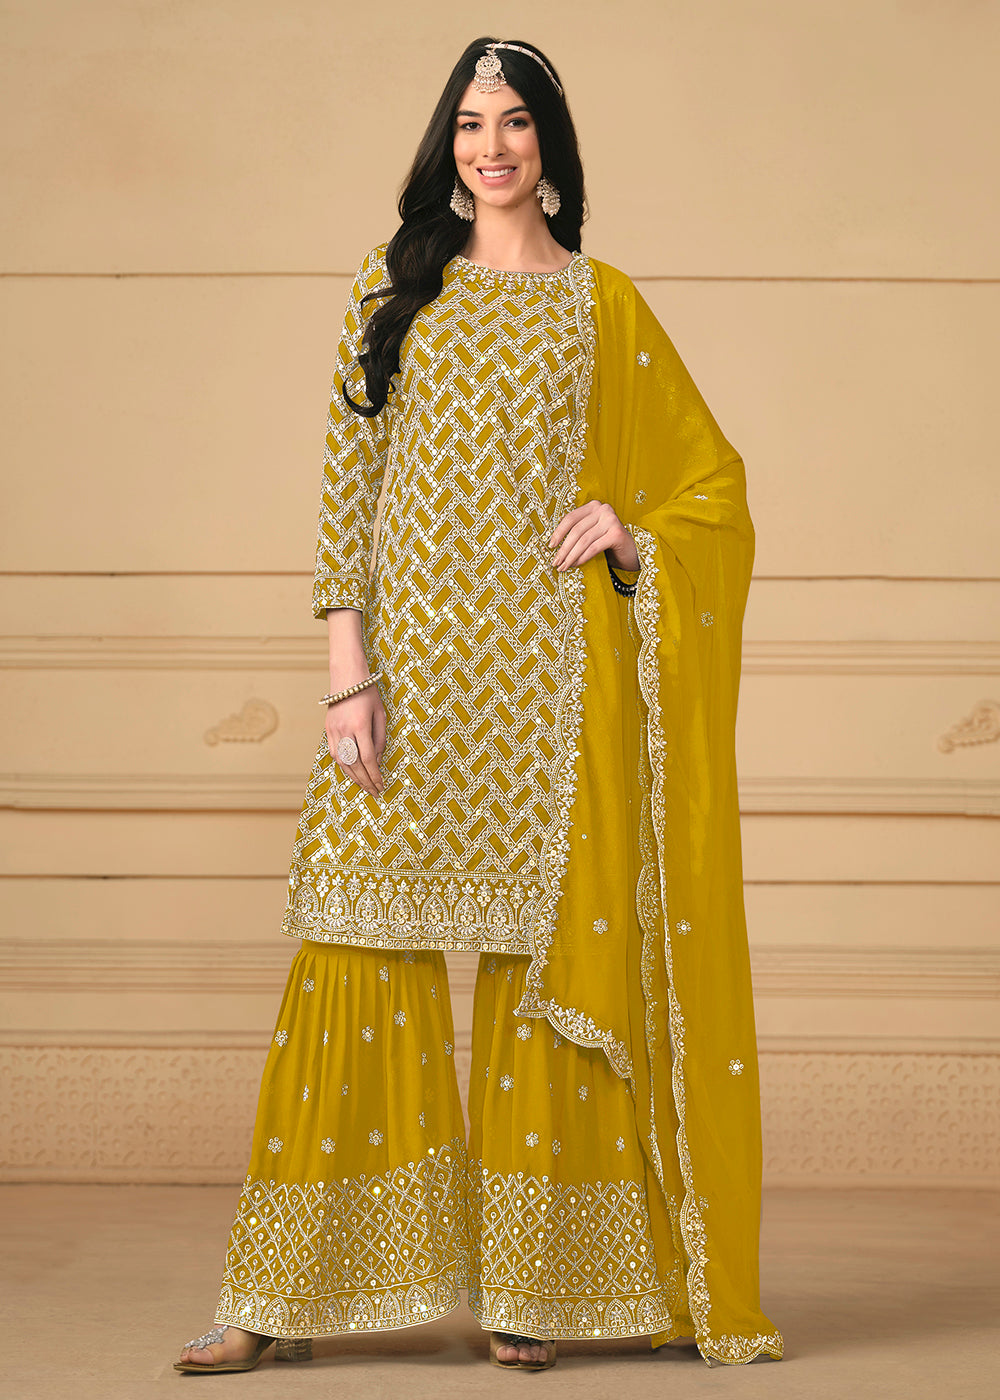 Shop Now Georgette Mustard Embroidered Gharara Style Suit Online at Empress Clothing in USA, UK, Canada, Italy & Worldwide. 